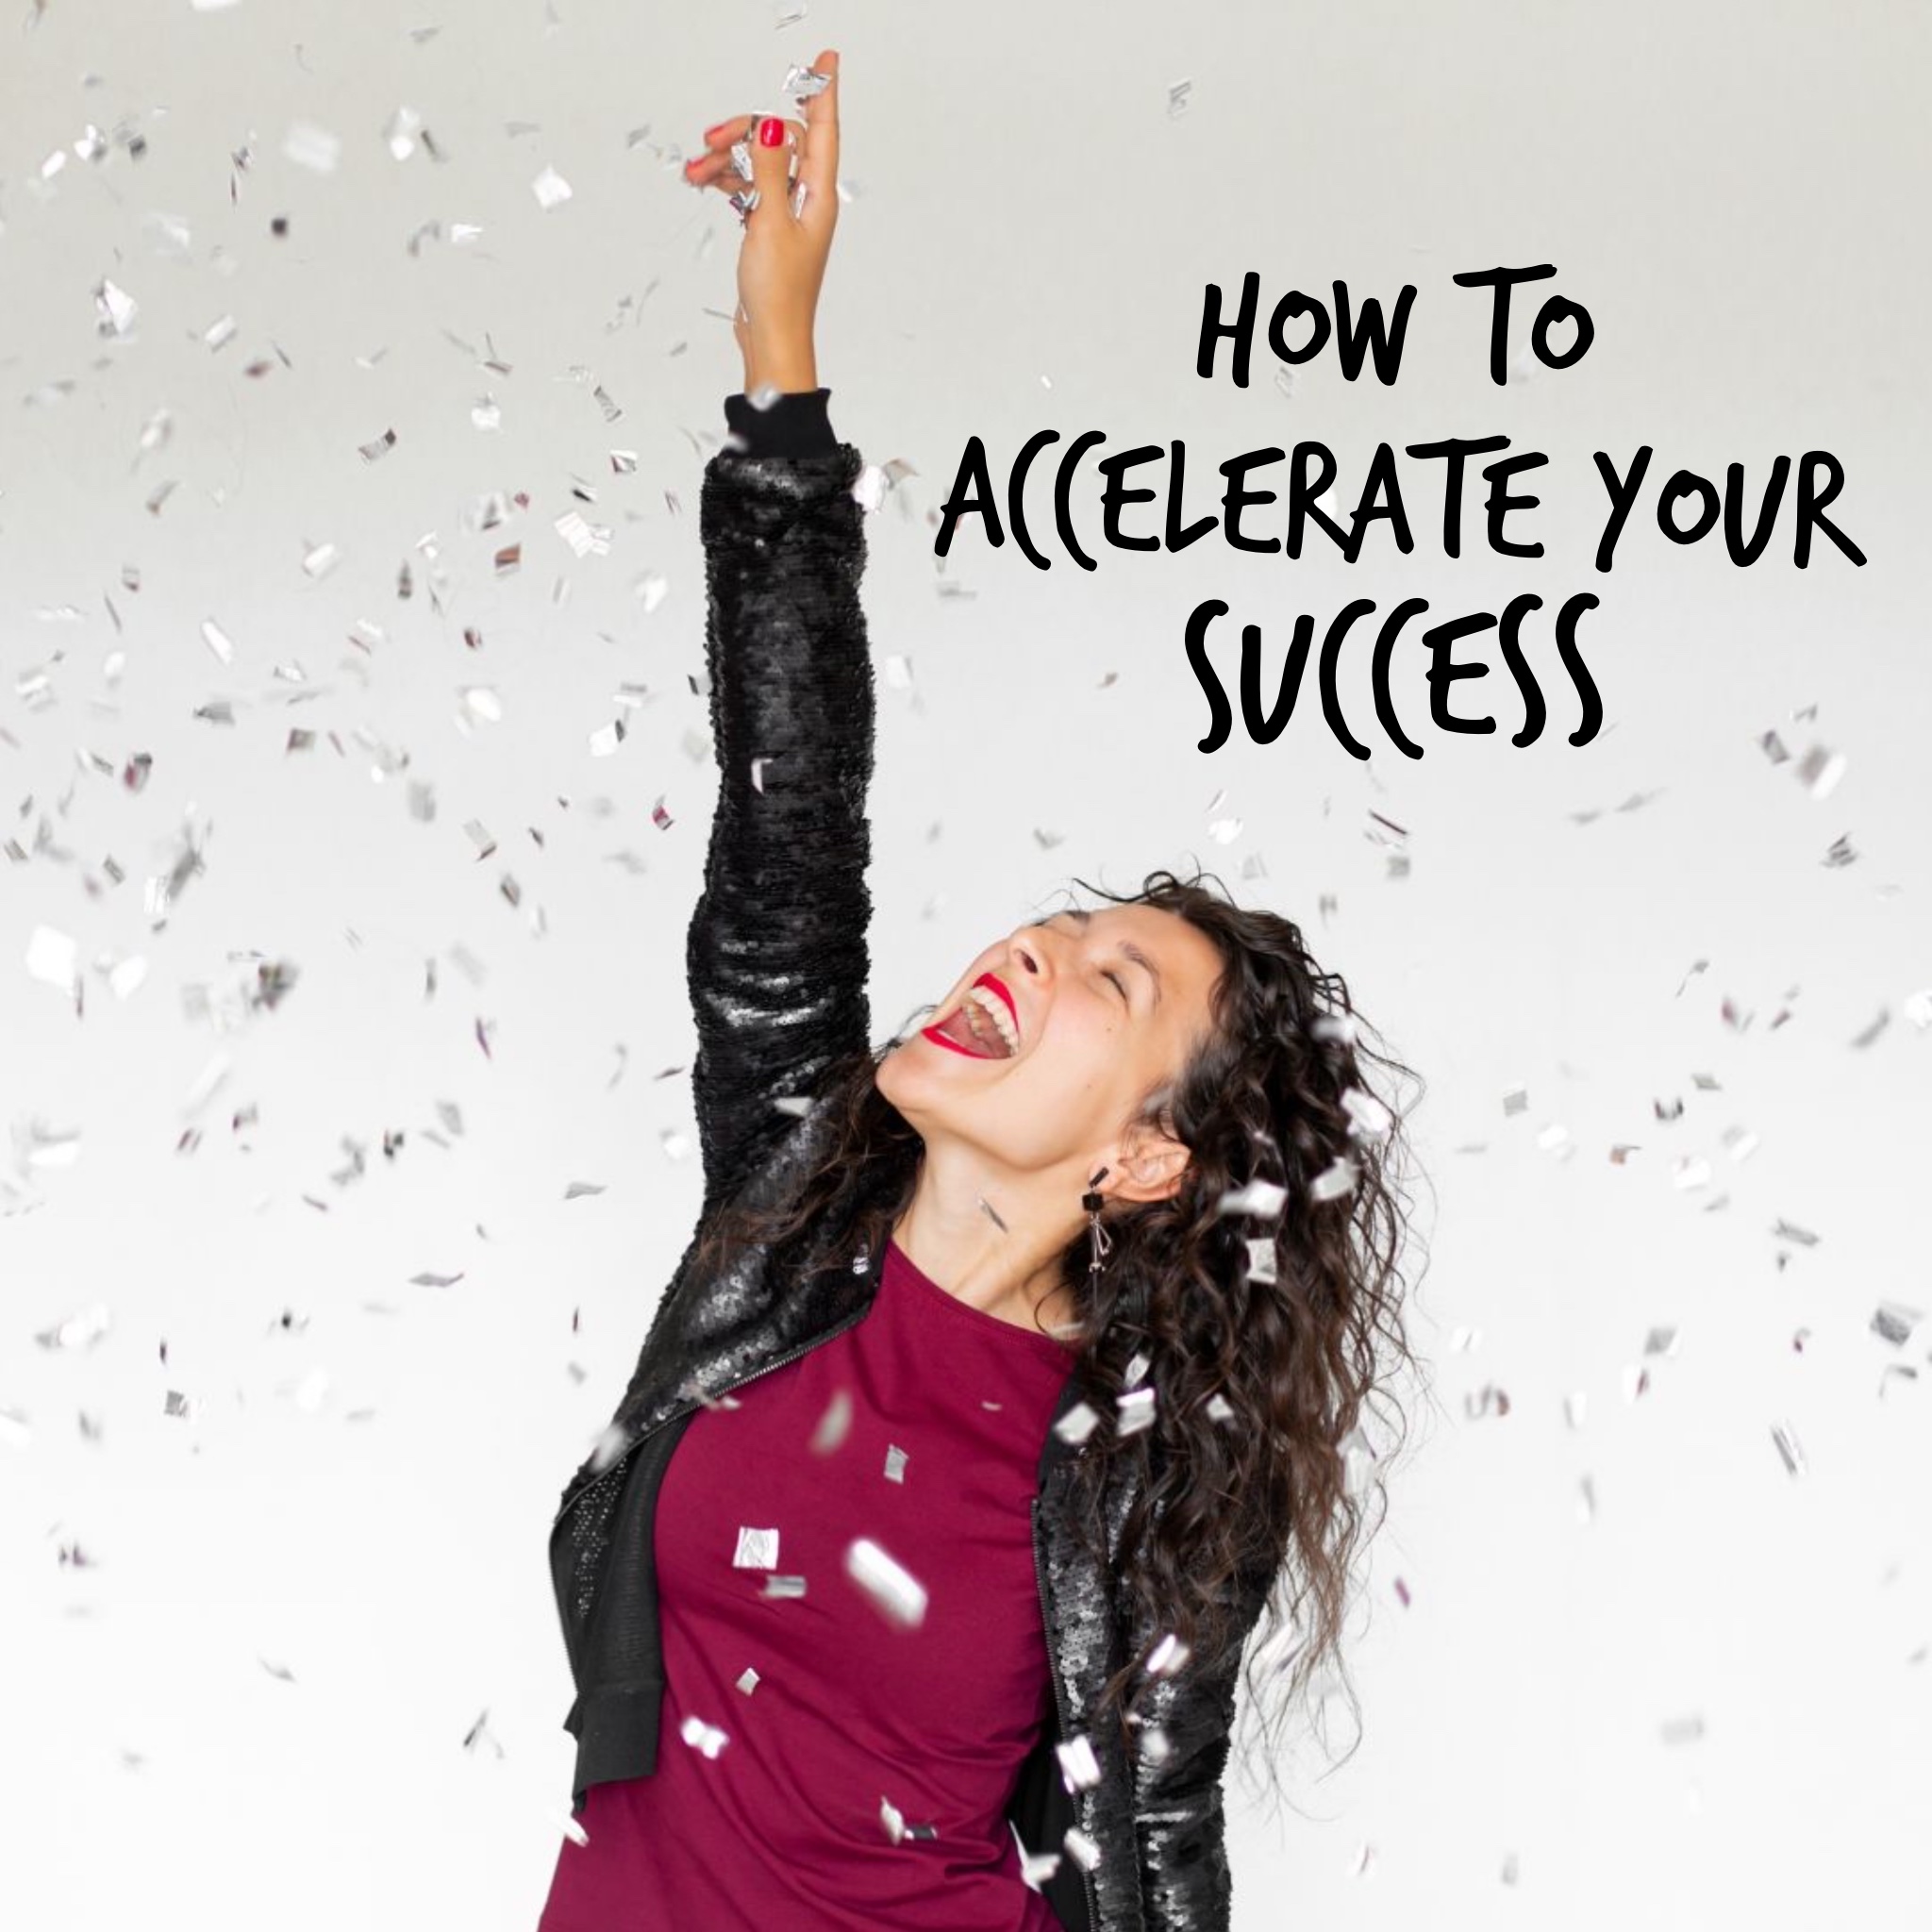 How to Accelerate your Success